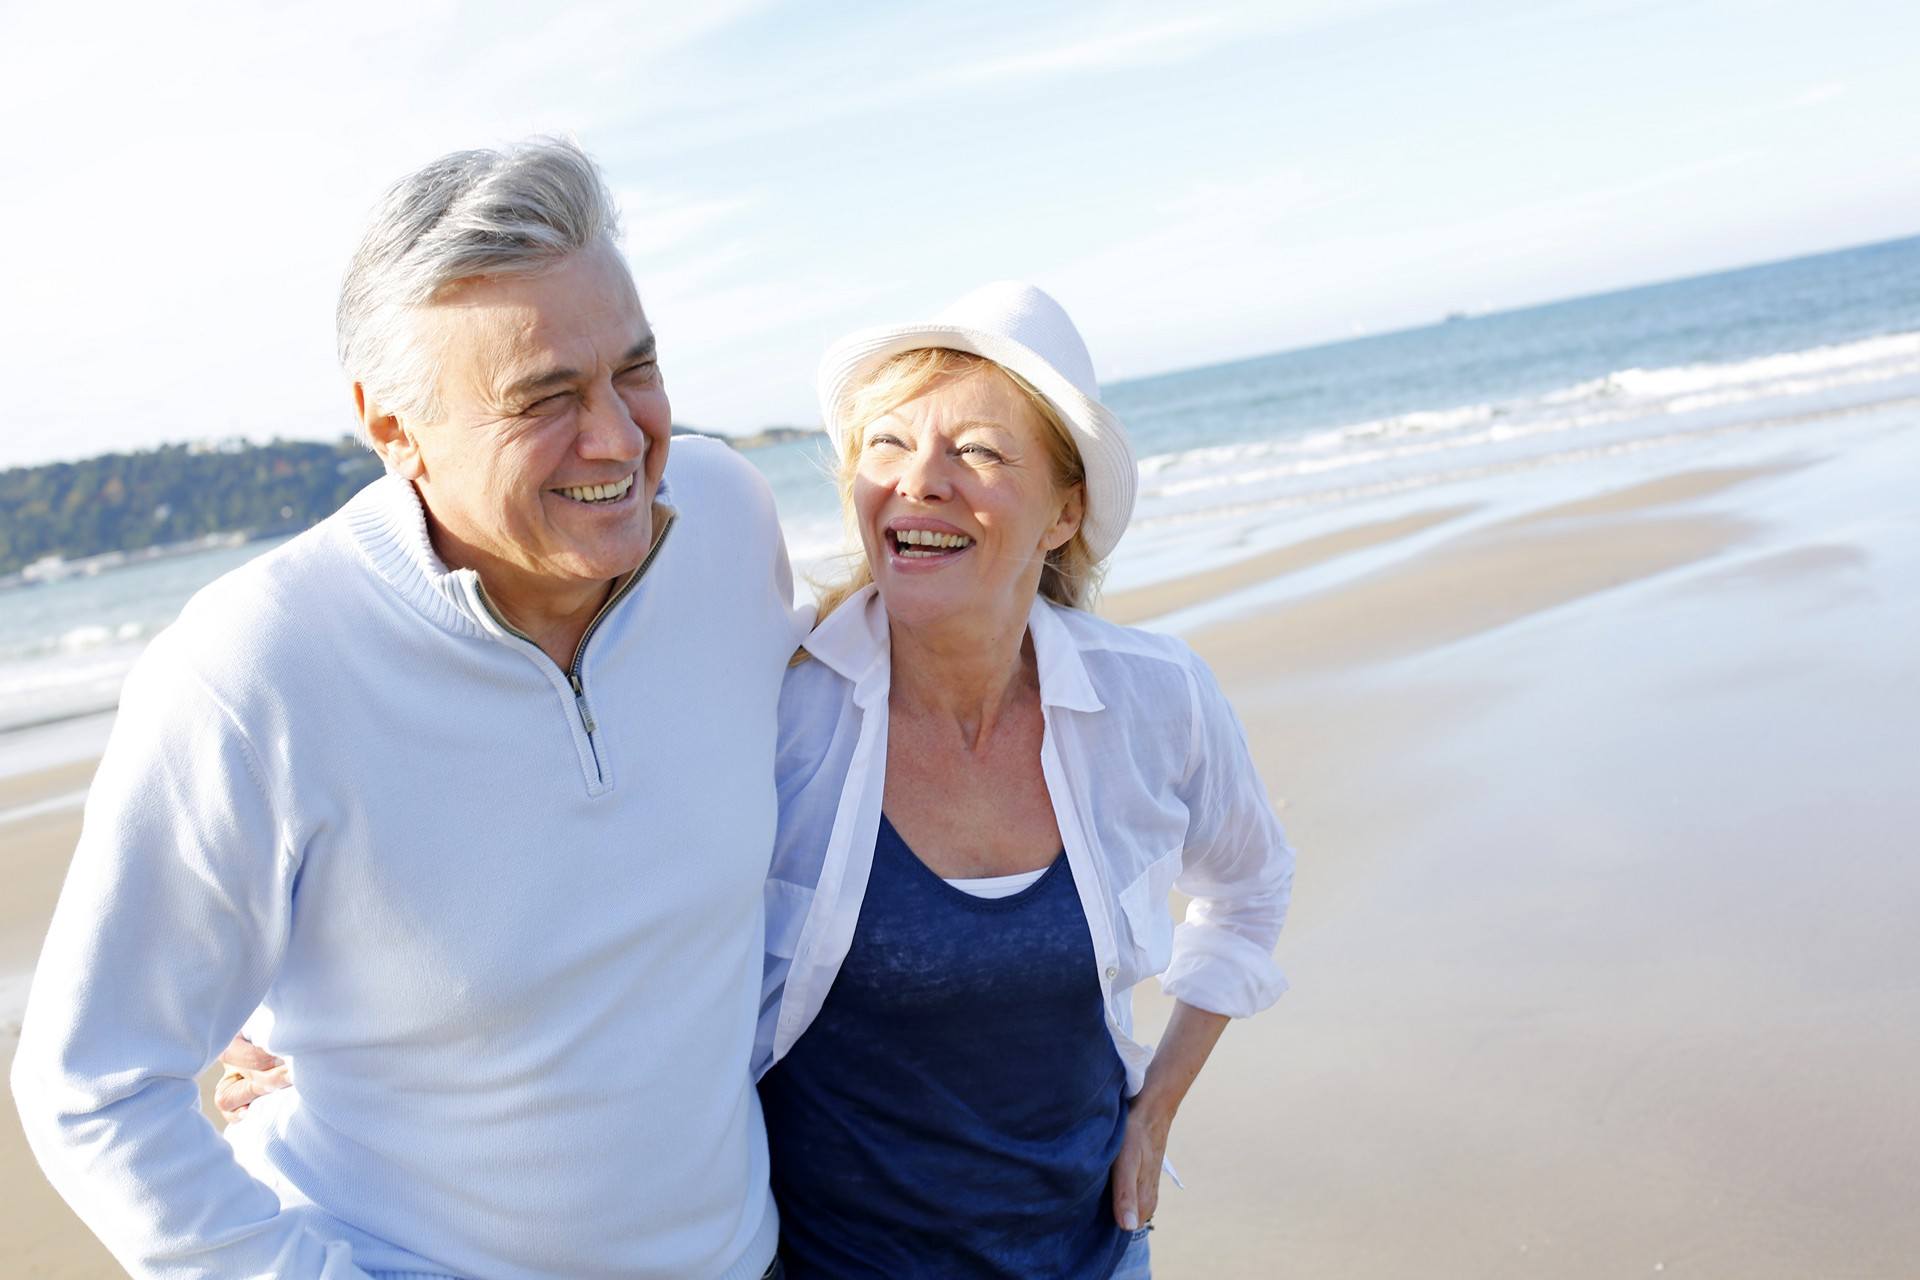 Permanent dentures supported by dental implants